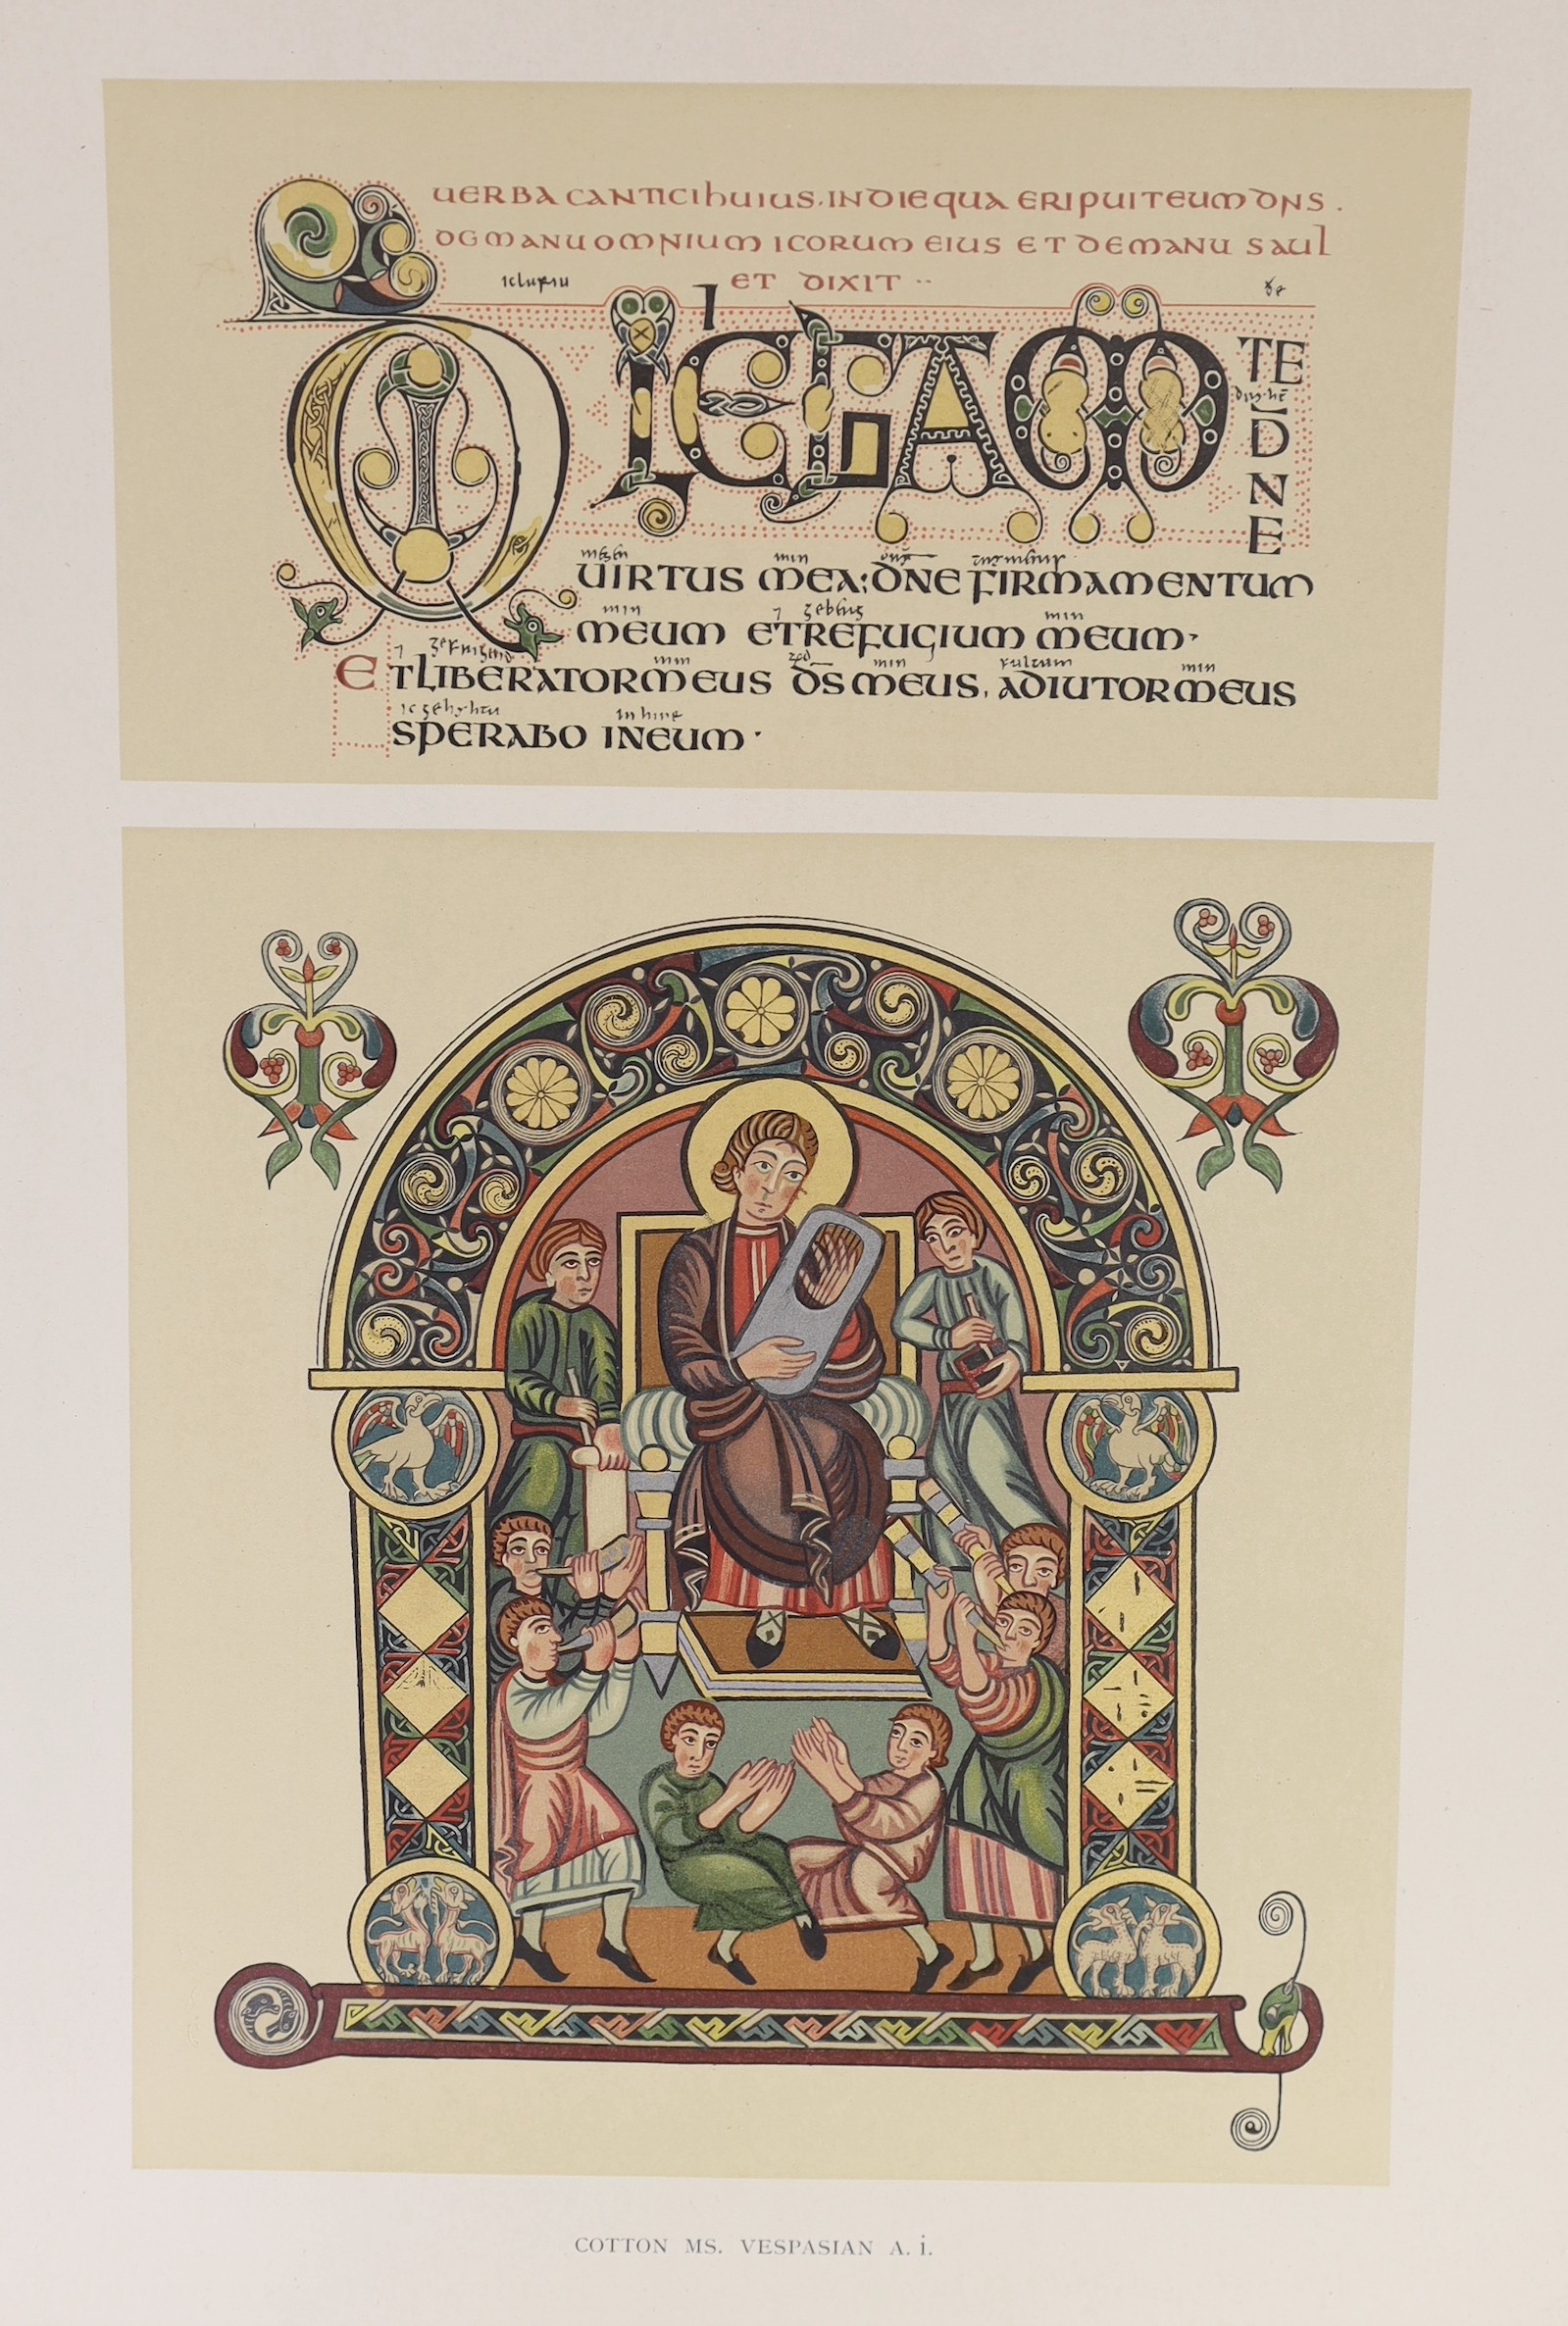 Warner, George F - Illuminated Manuscripts in the British Museum, series IV, one of 500, folio, quarter cloth with printed boards, with 15 chromolithograph plates, British Museum, London, 1903